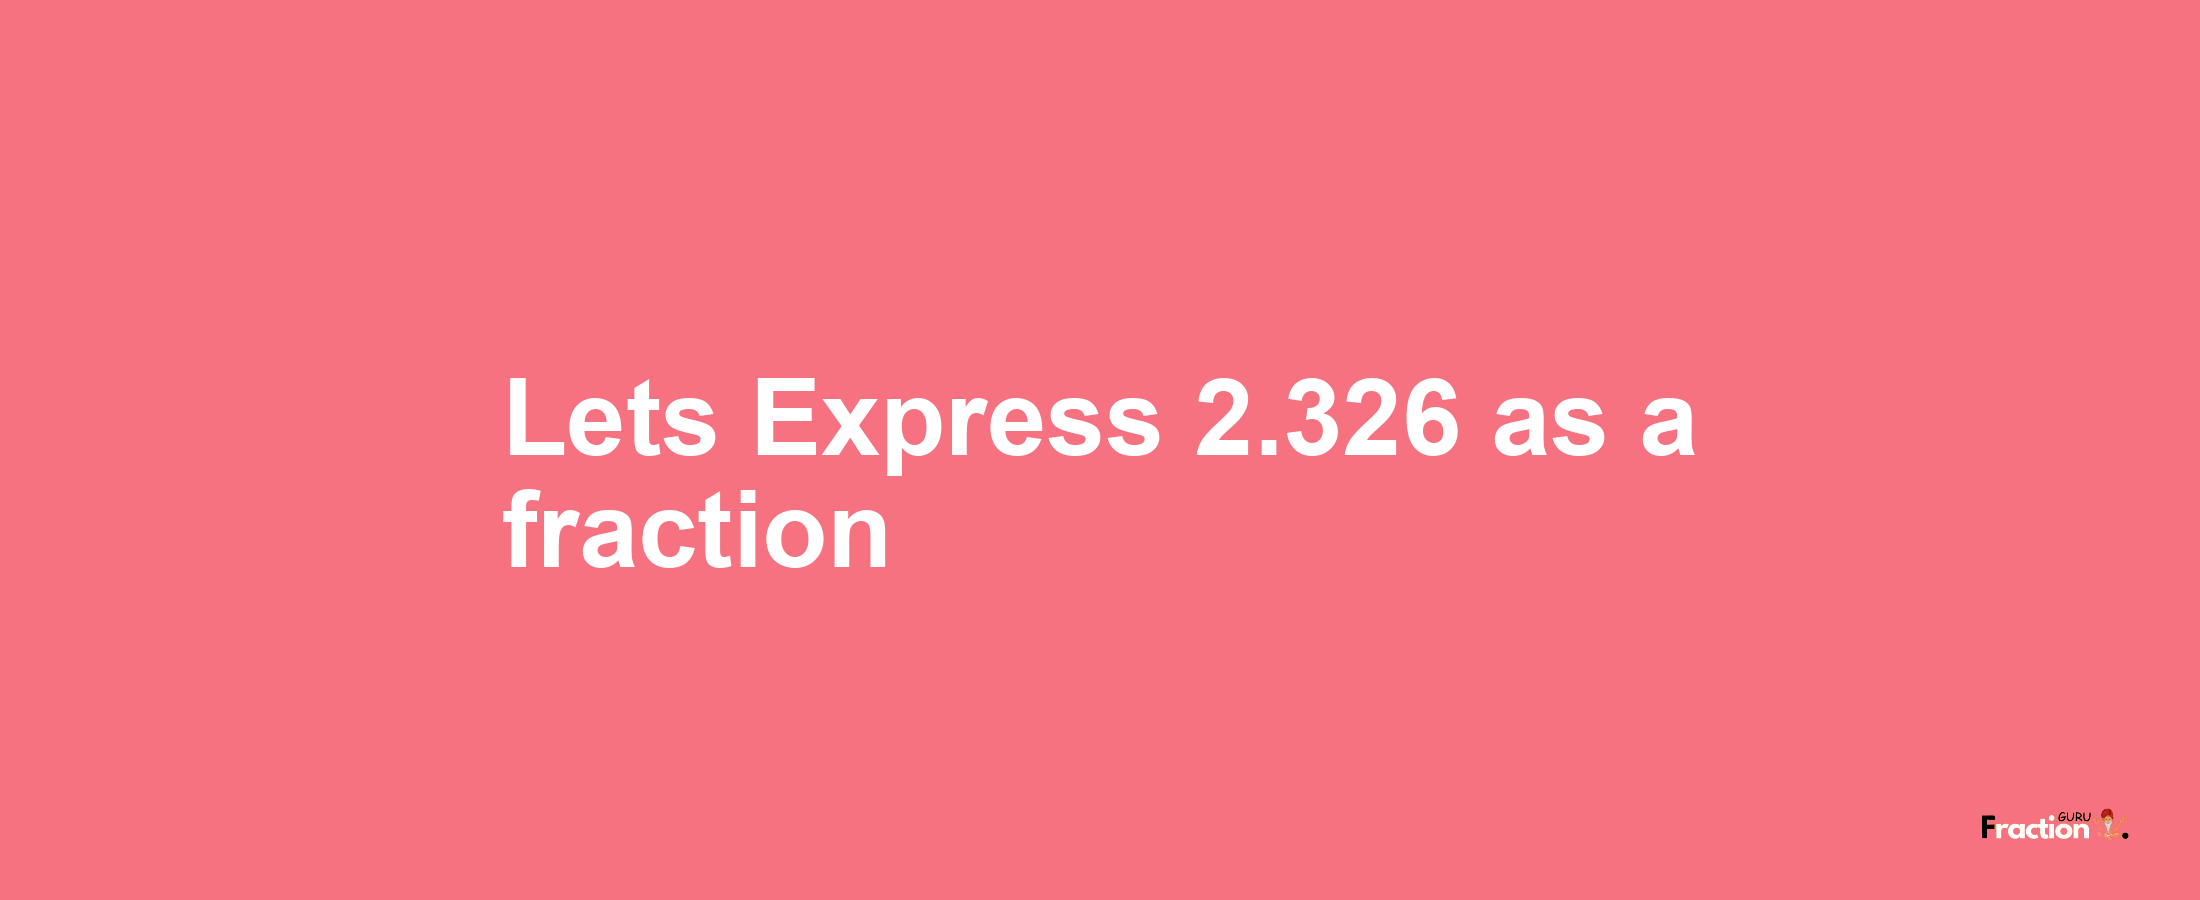 Lets Express 2.326 as afraction